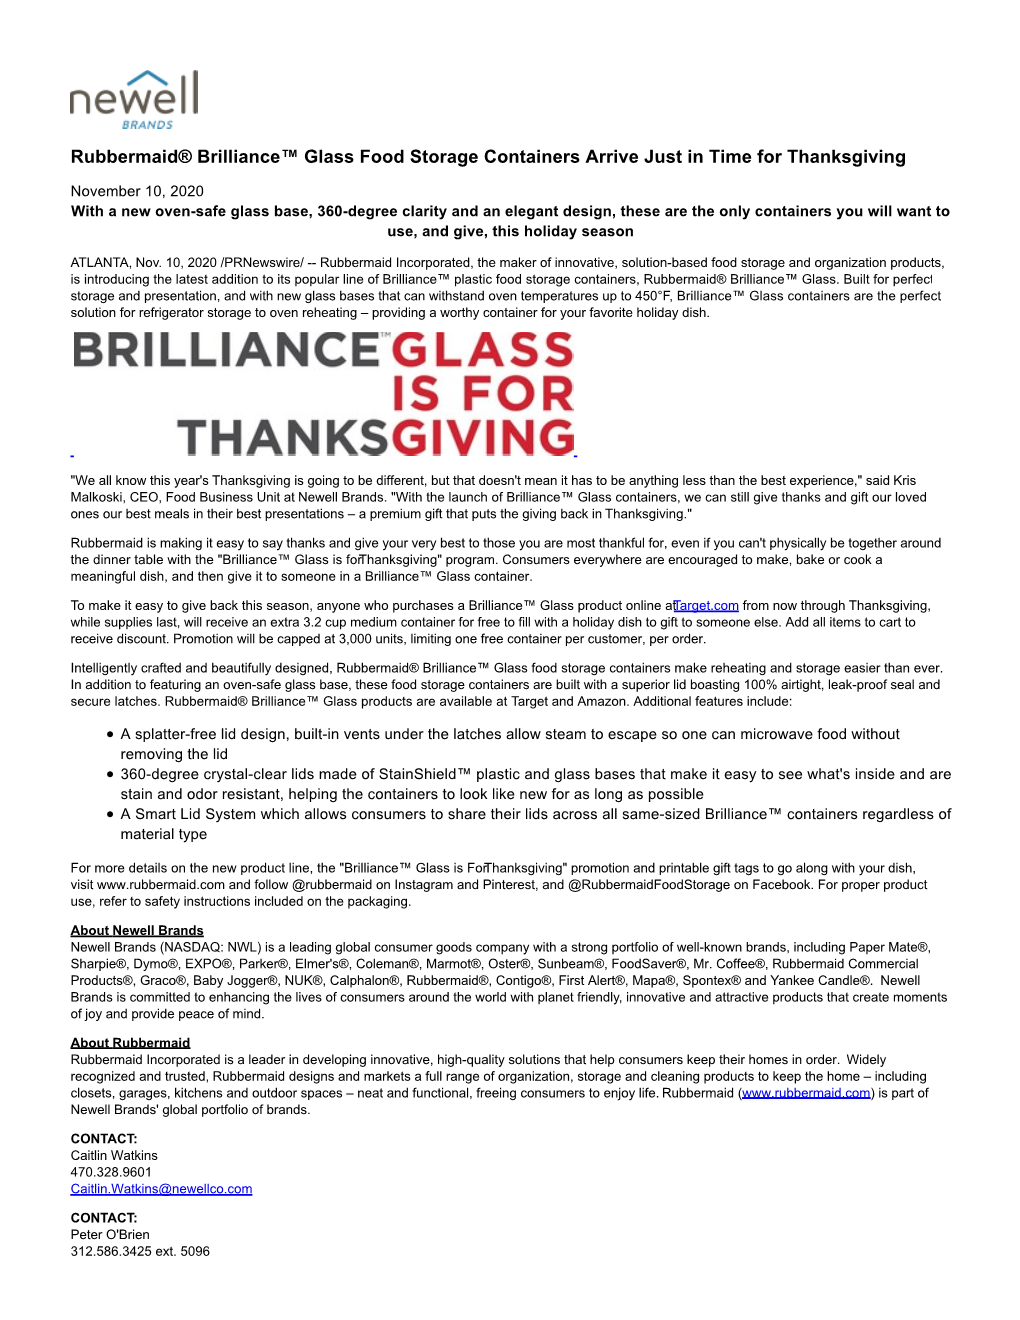 Rubbermaid® Brilliance™ Glass Food Storage Containers Arrive Just in Time for Thanksgiving